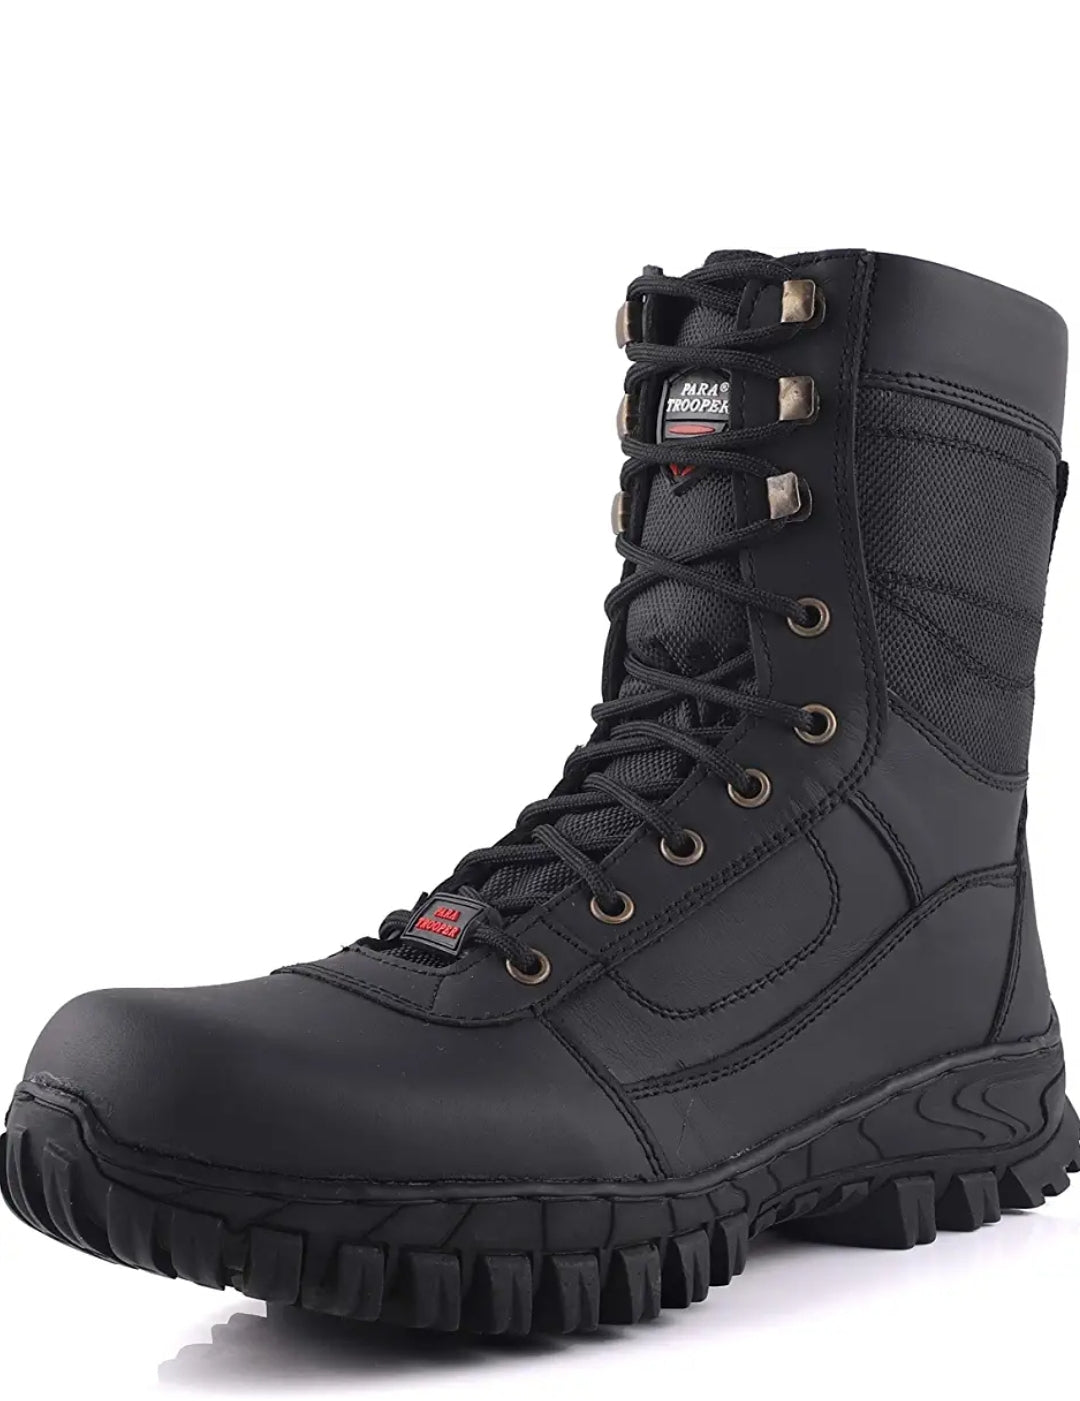 PARA TROOPER Men's Black Leather Tactical Combat Army Boot